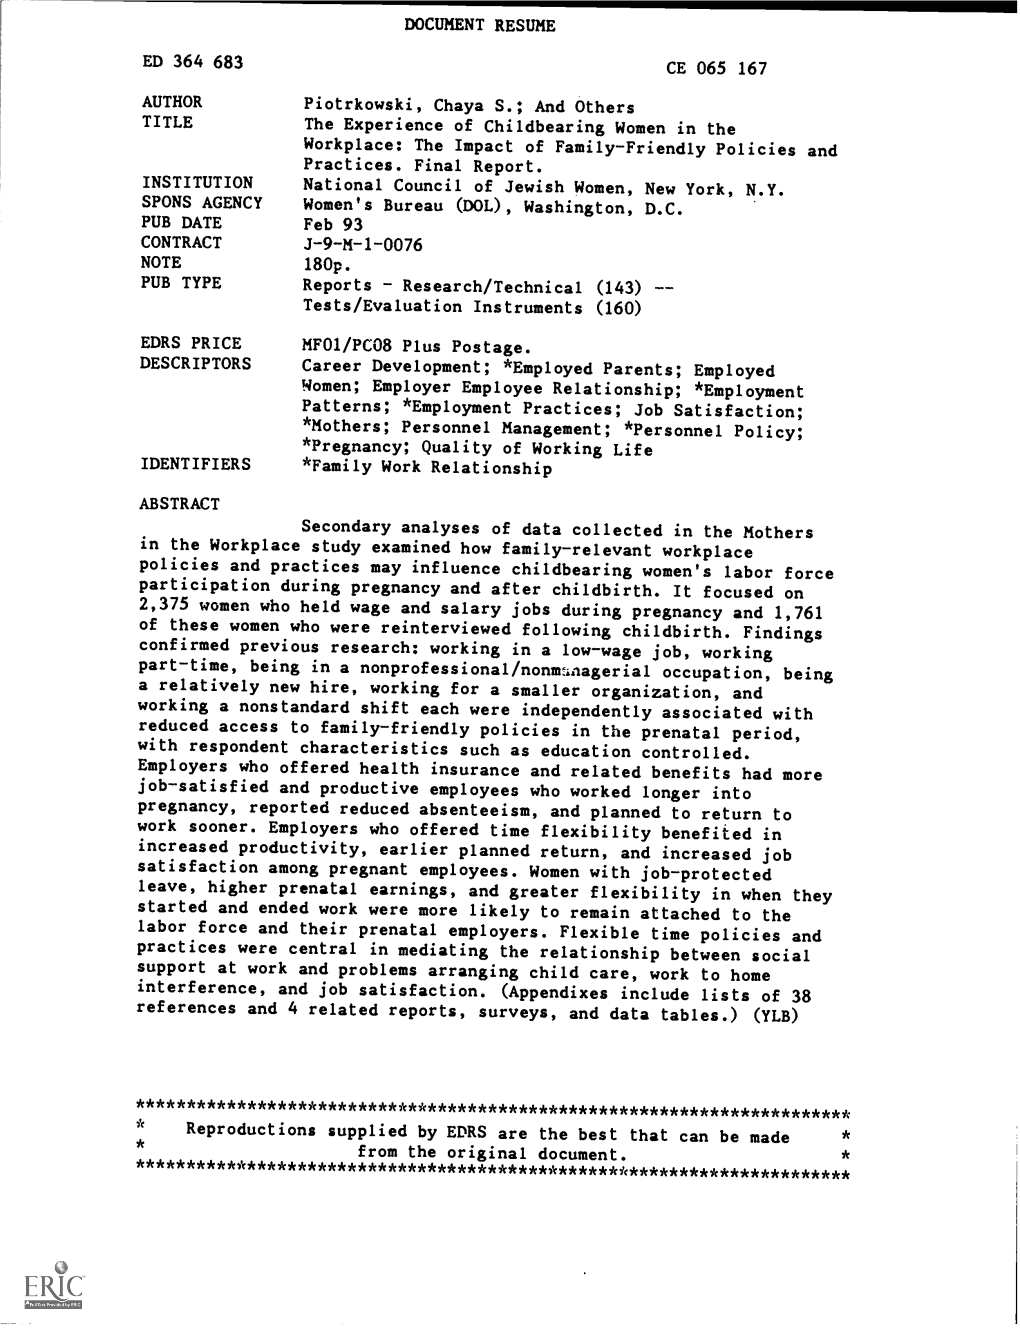 DOCUMENT RESUME ED 364 683 CE 065 167 AUTHOR Piotrkowski, Chaya S.; and Others TITLE the Experience of Childbearing Women In